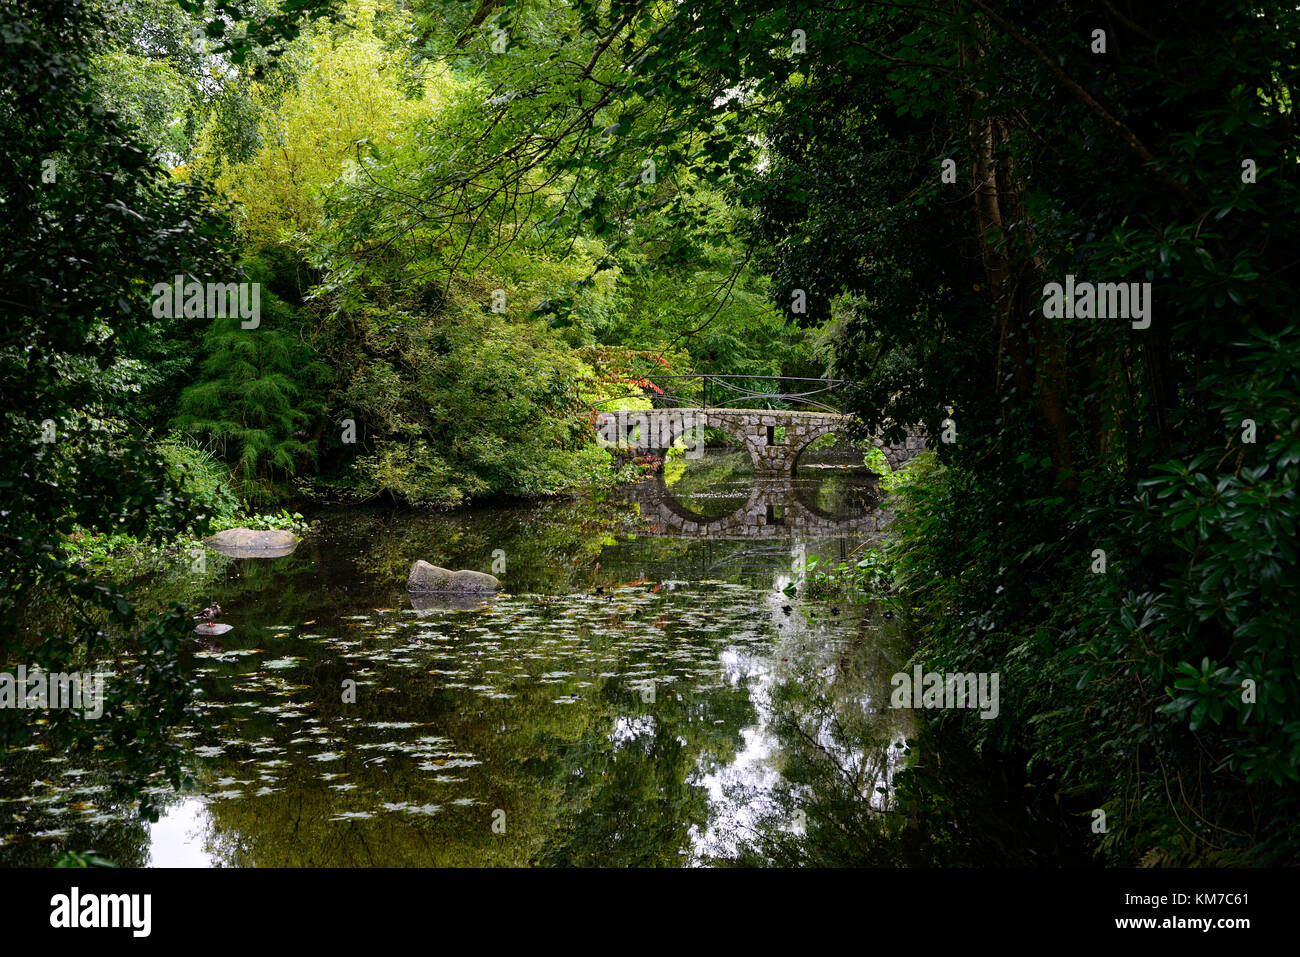 Stone,arch,bridge,perfect reflection,reflect,frame,framed,lake,pond,altamont gardens,carlow,RM Floral Stock Photo